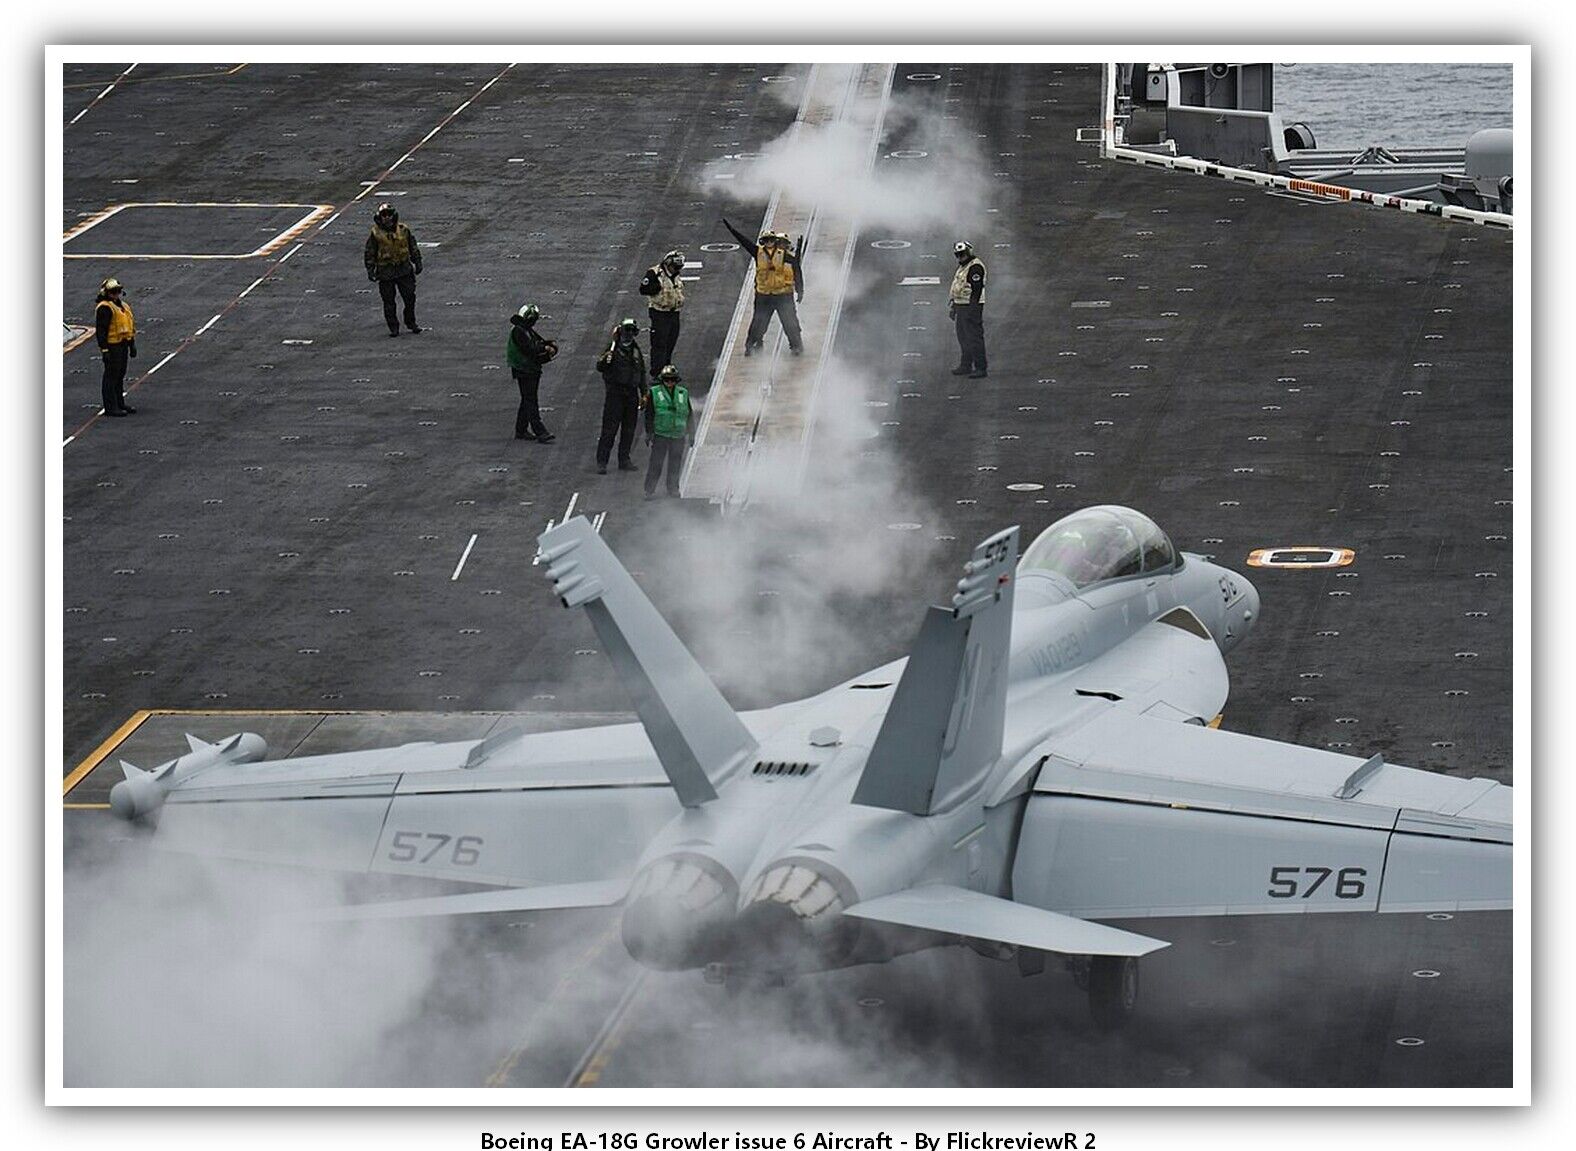 Boeing EA-18G Growler issue 6 Aircraft